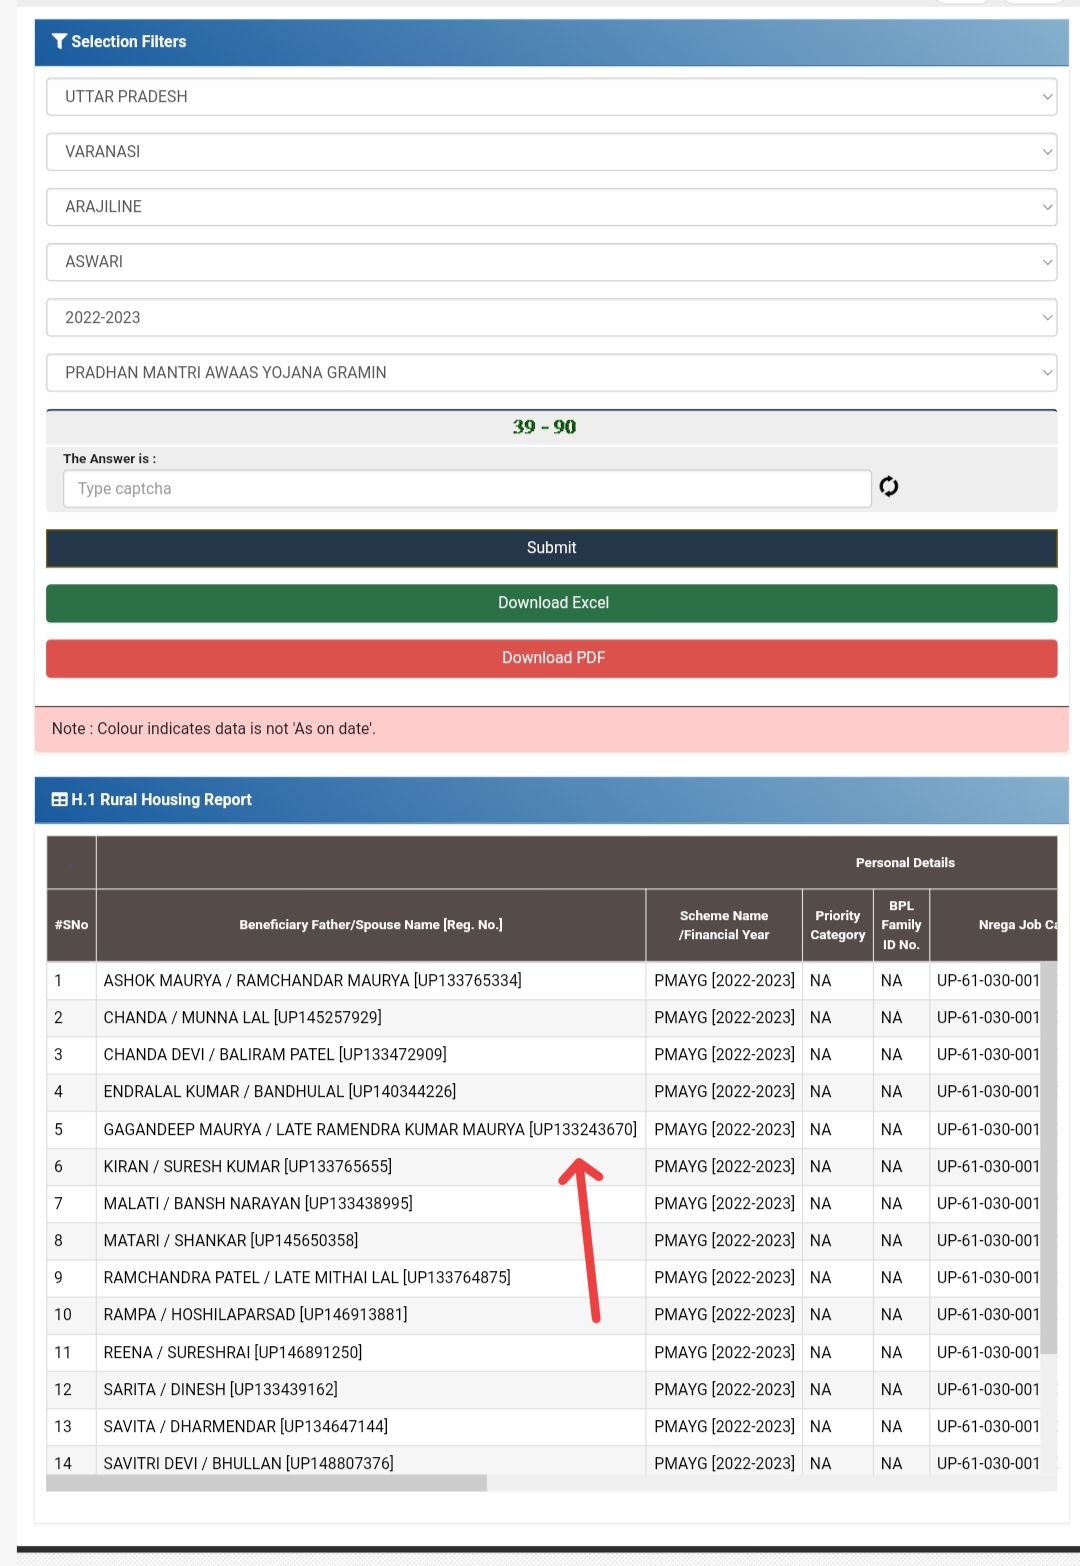 Beneficiary details Rhreporting nic in